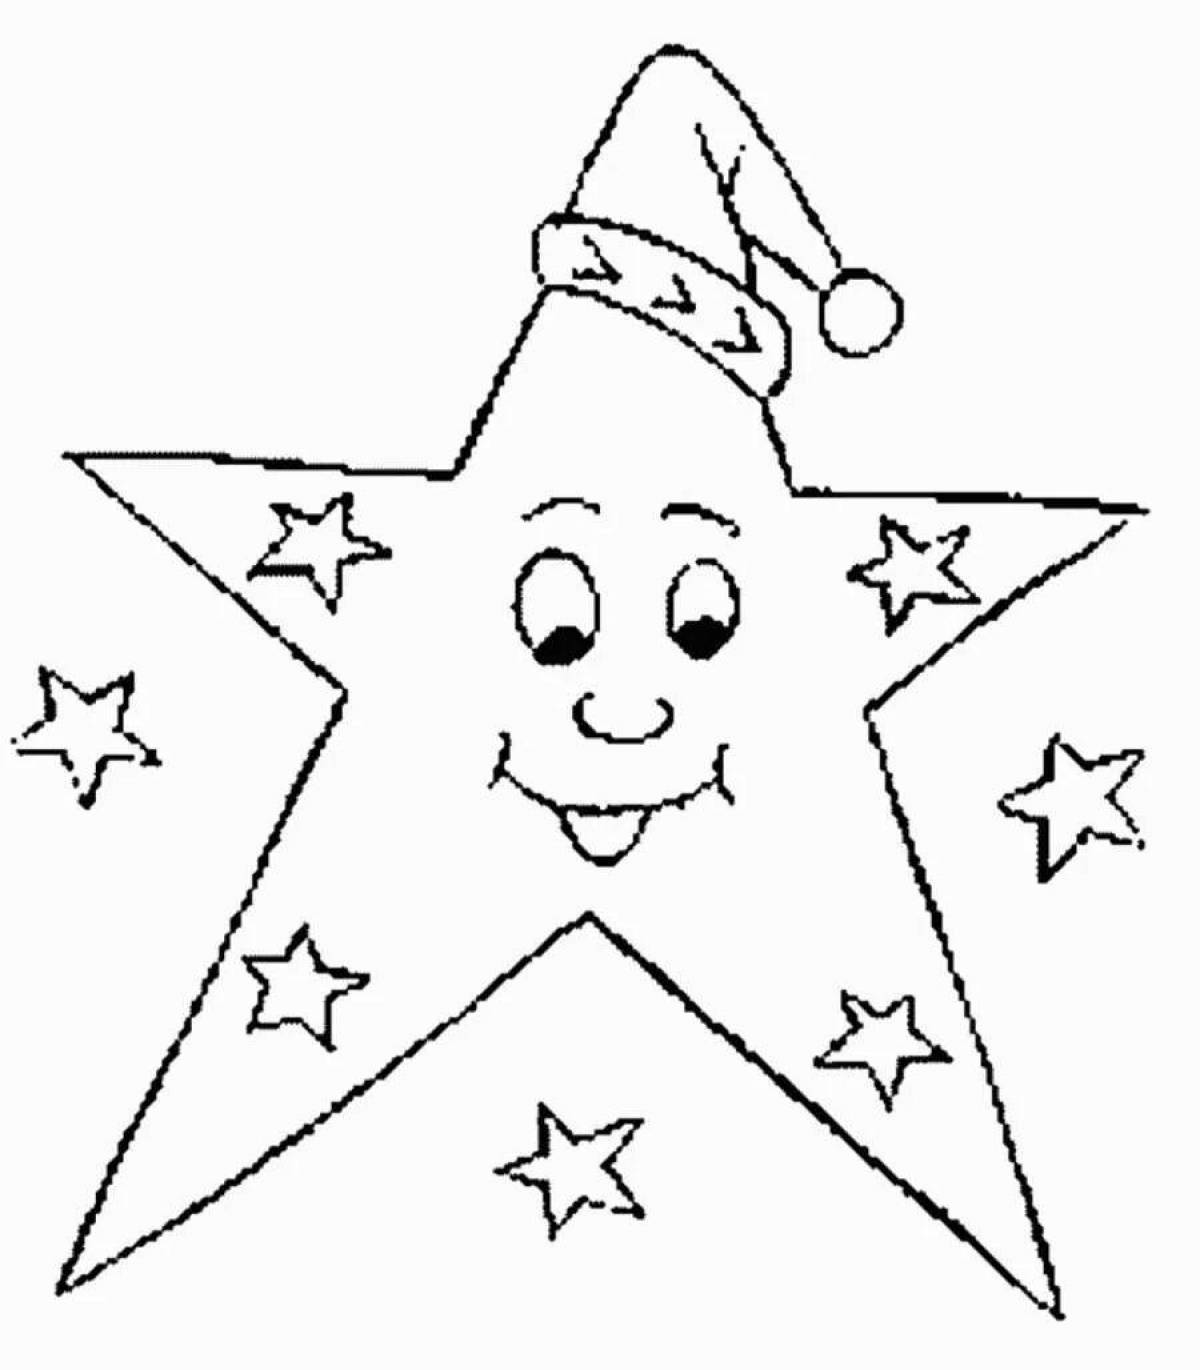 Coloring book shining star for kids